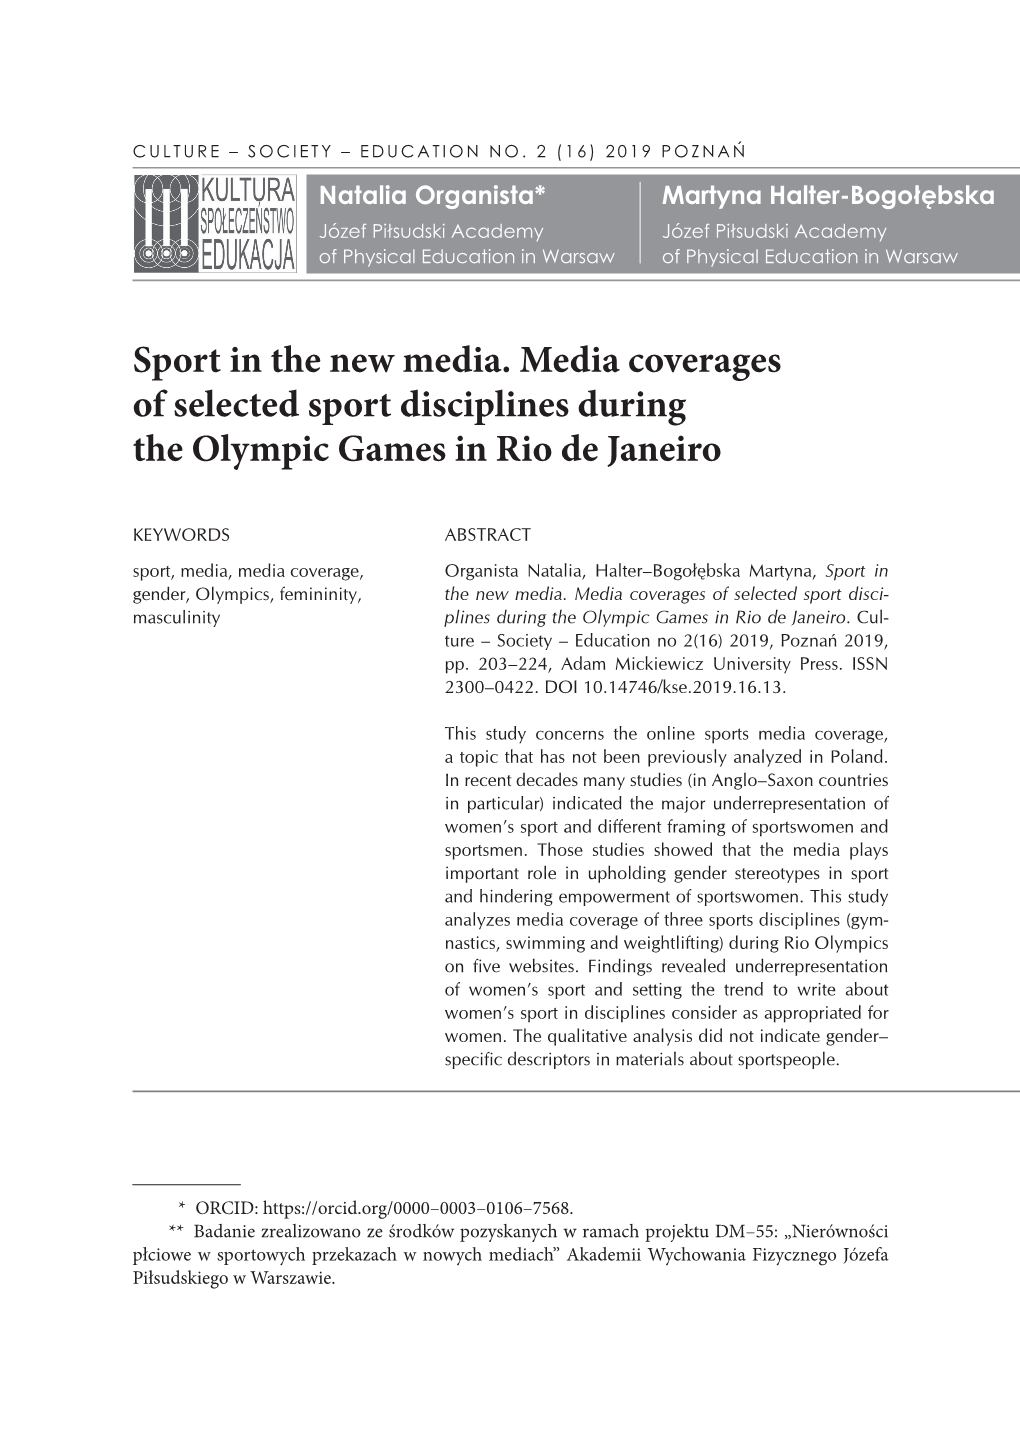 Sport in the New Media. Media Coverages of Selected Sport Disciplines During the Olympic Games in Rio De Janeiro12